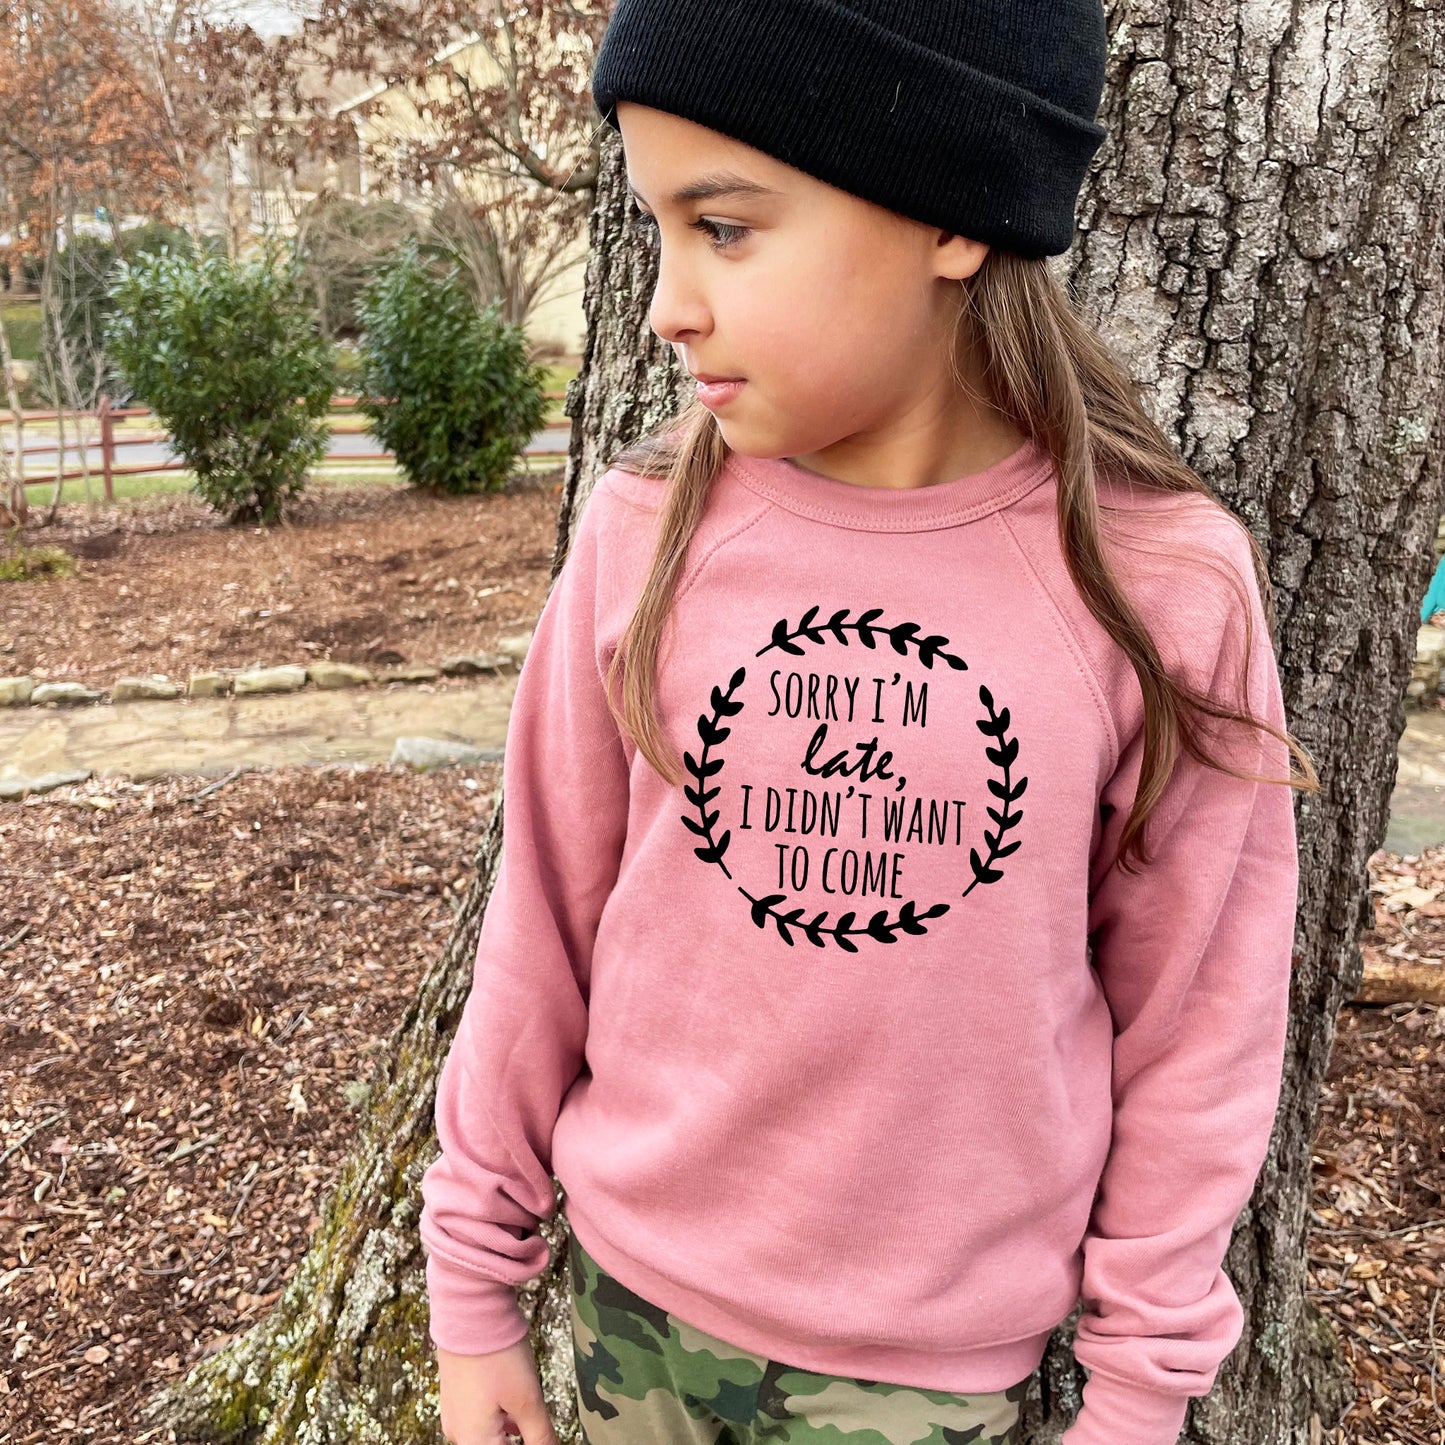 Sorry I'm Late, I Didn't Want To Come - Kid's Sweatshirt - Heather Gray or Mauve